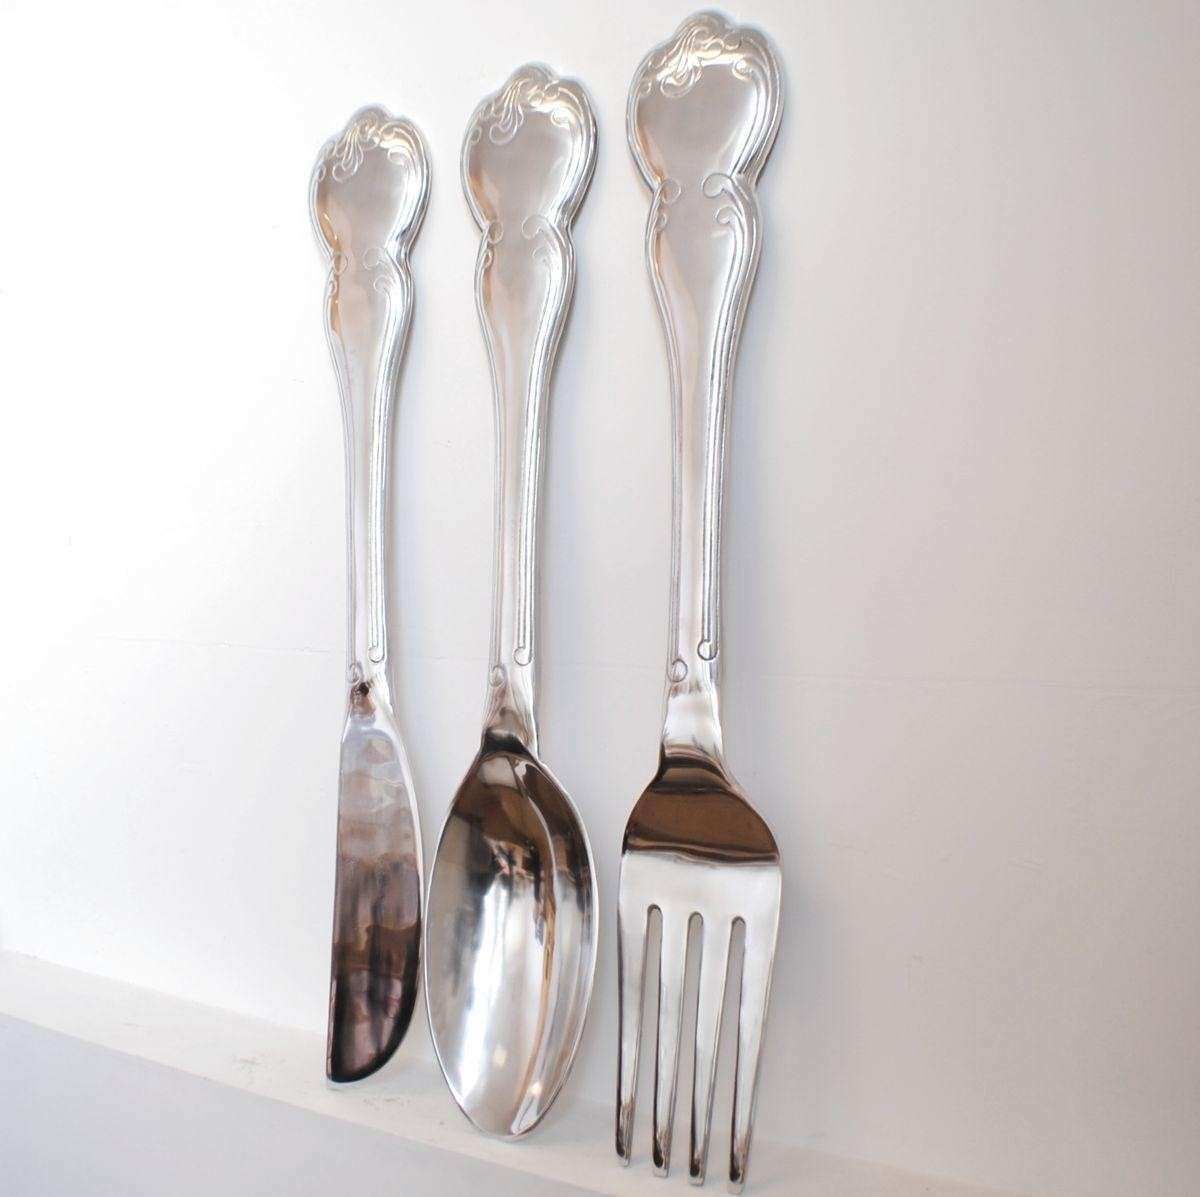 Oversized Fork And Spoon Wall Decor Best Of 20 Best Big Spoon And Regarding Fork And Spoon Wall Art (View 7 of 20)